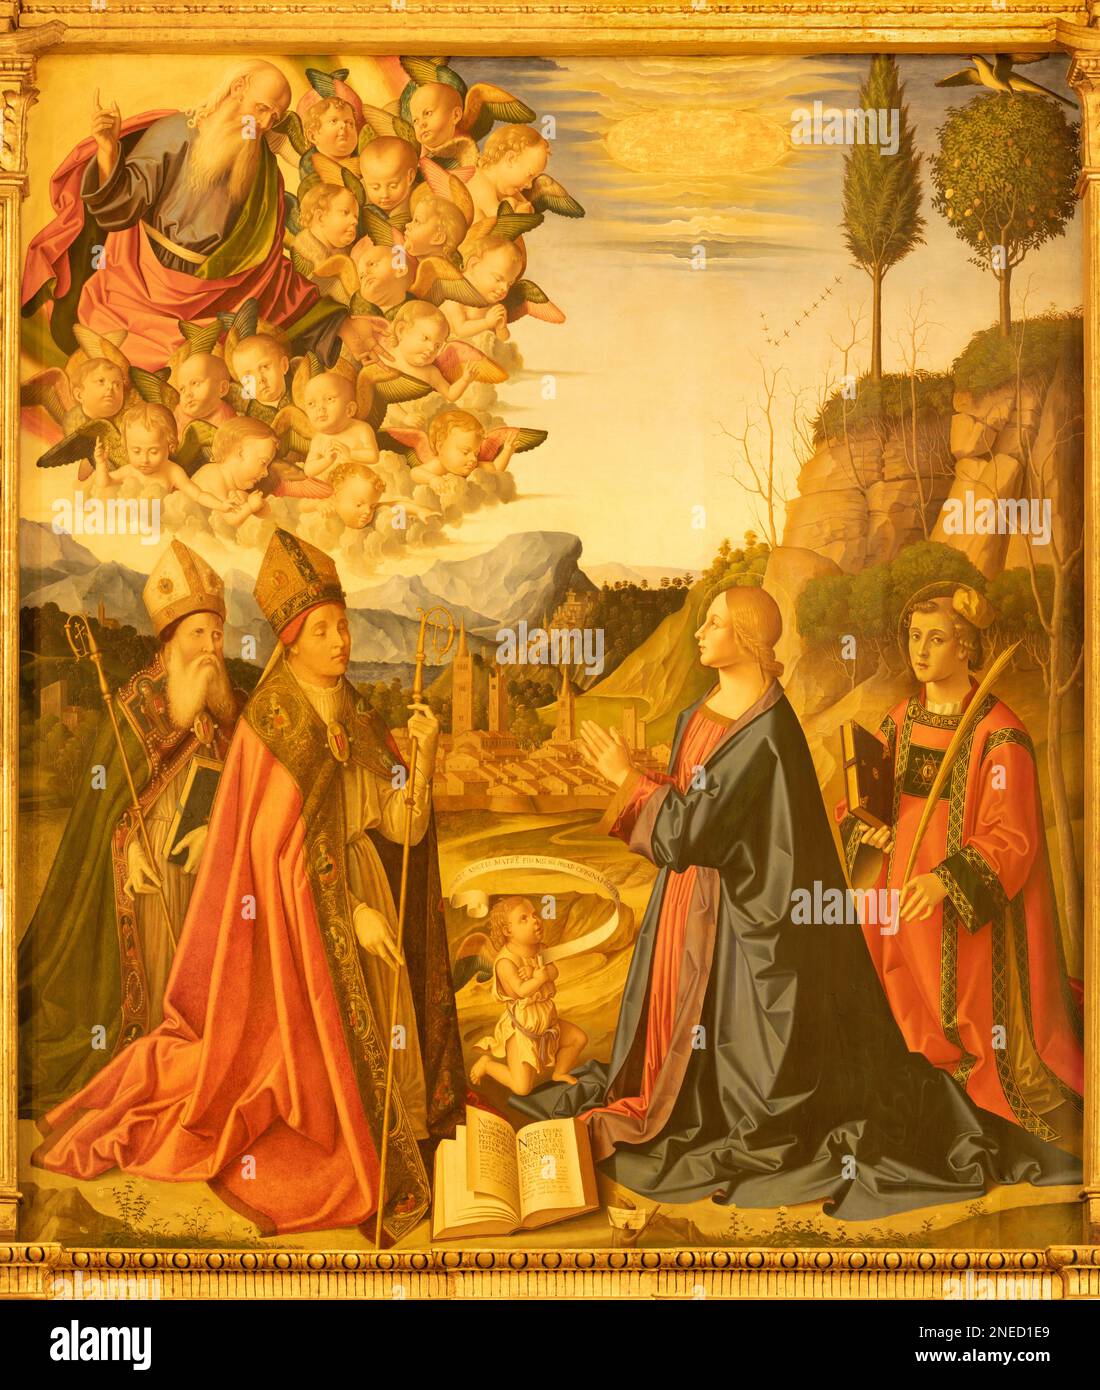 FORLÍ, ITALY - NOVEMBER 11, 2021: The renaissance paiting of Immaculate Conception and the saints in the church Basilica San Mercuriale Stock Photo